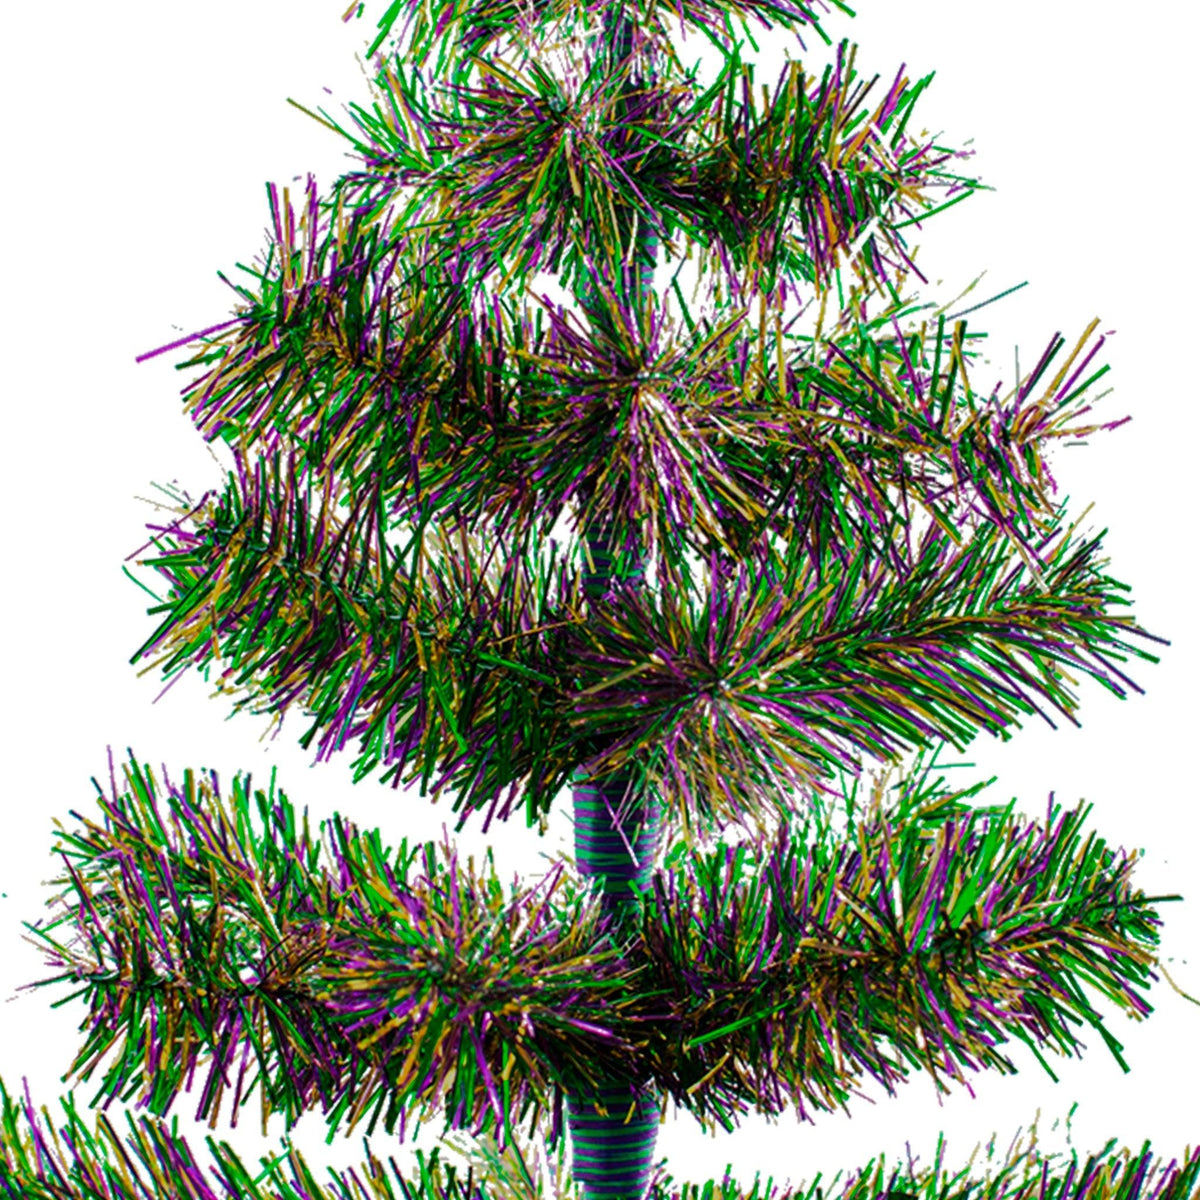 Lee Display's Mardi Gras Themed Christmas Tree on Sale Now 24in